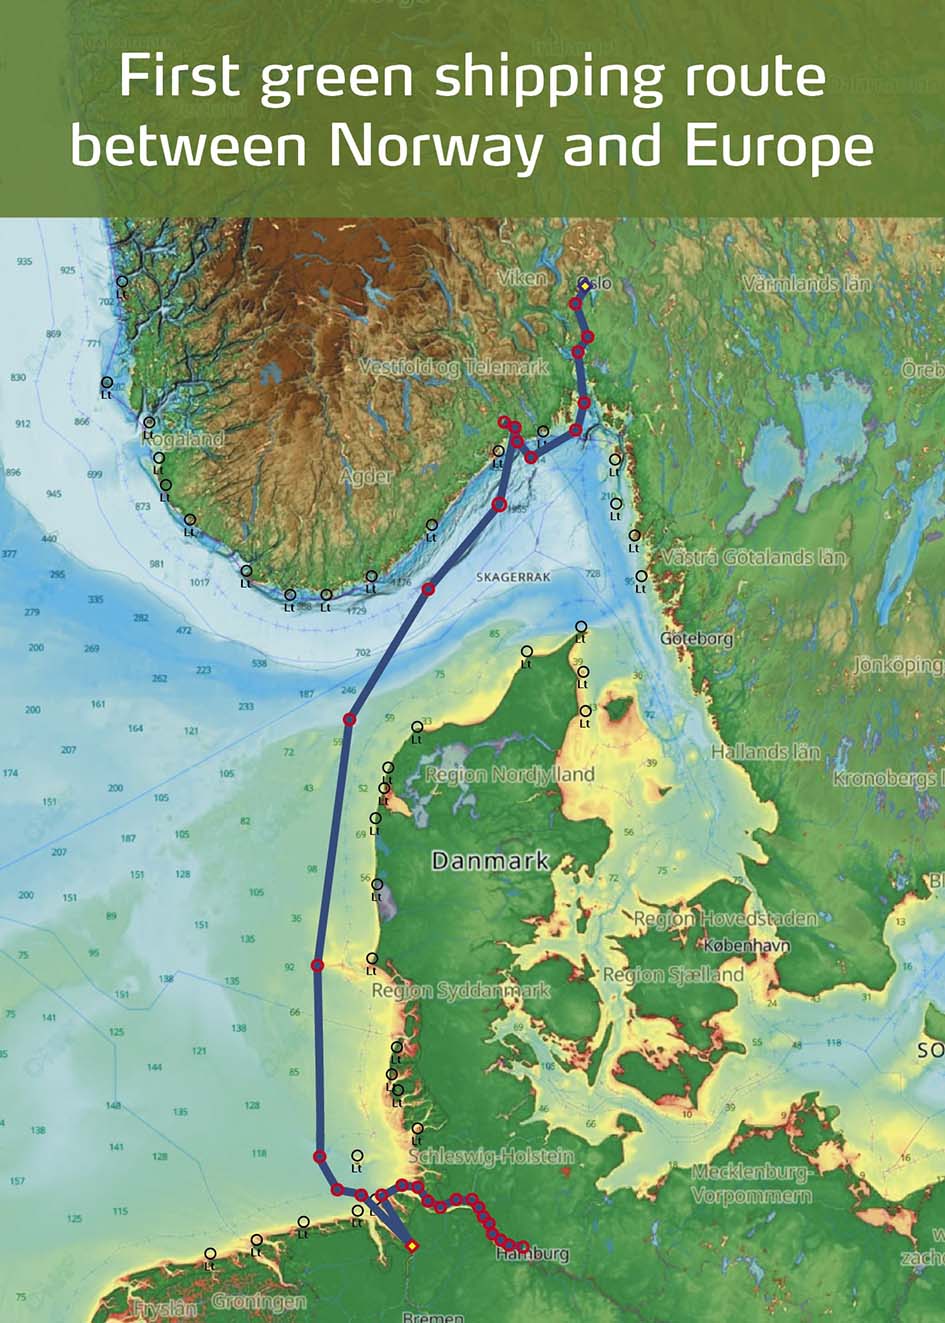 Illustration of first green shipping route between Norway and Europe